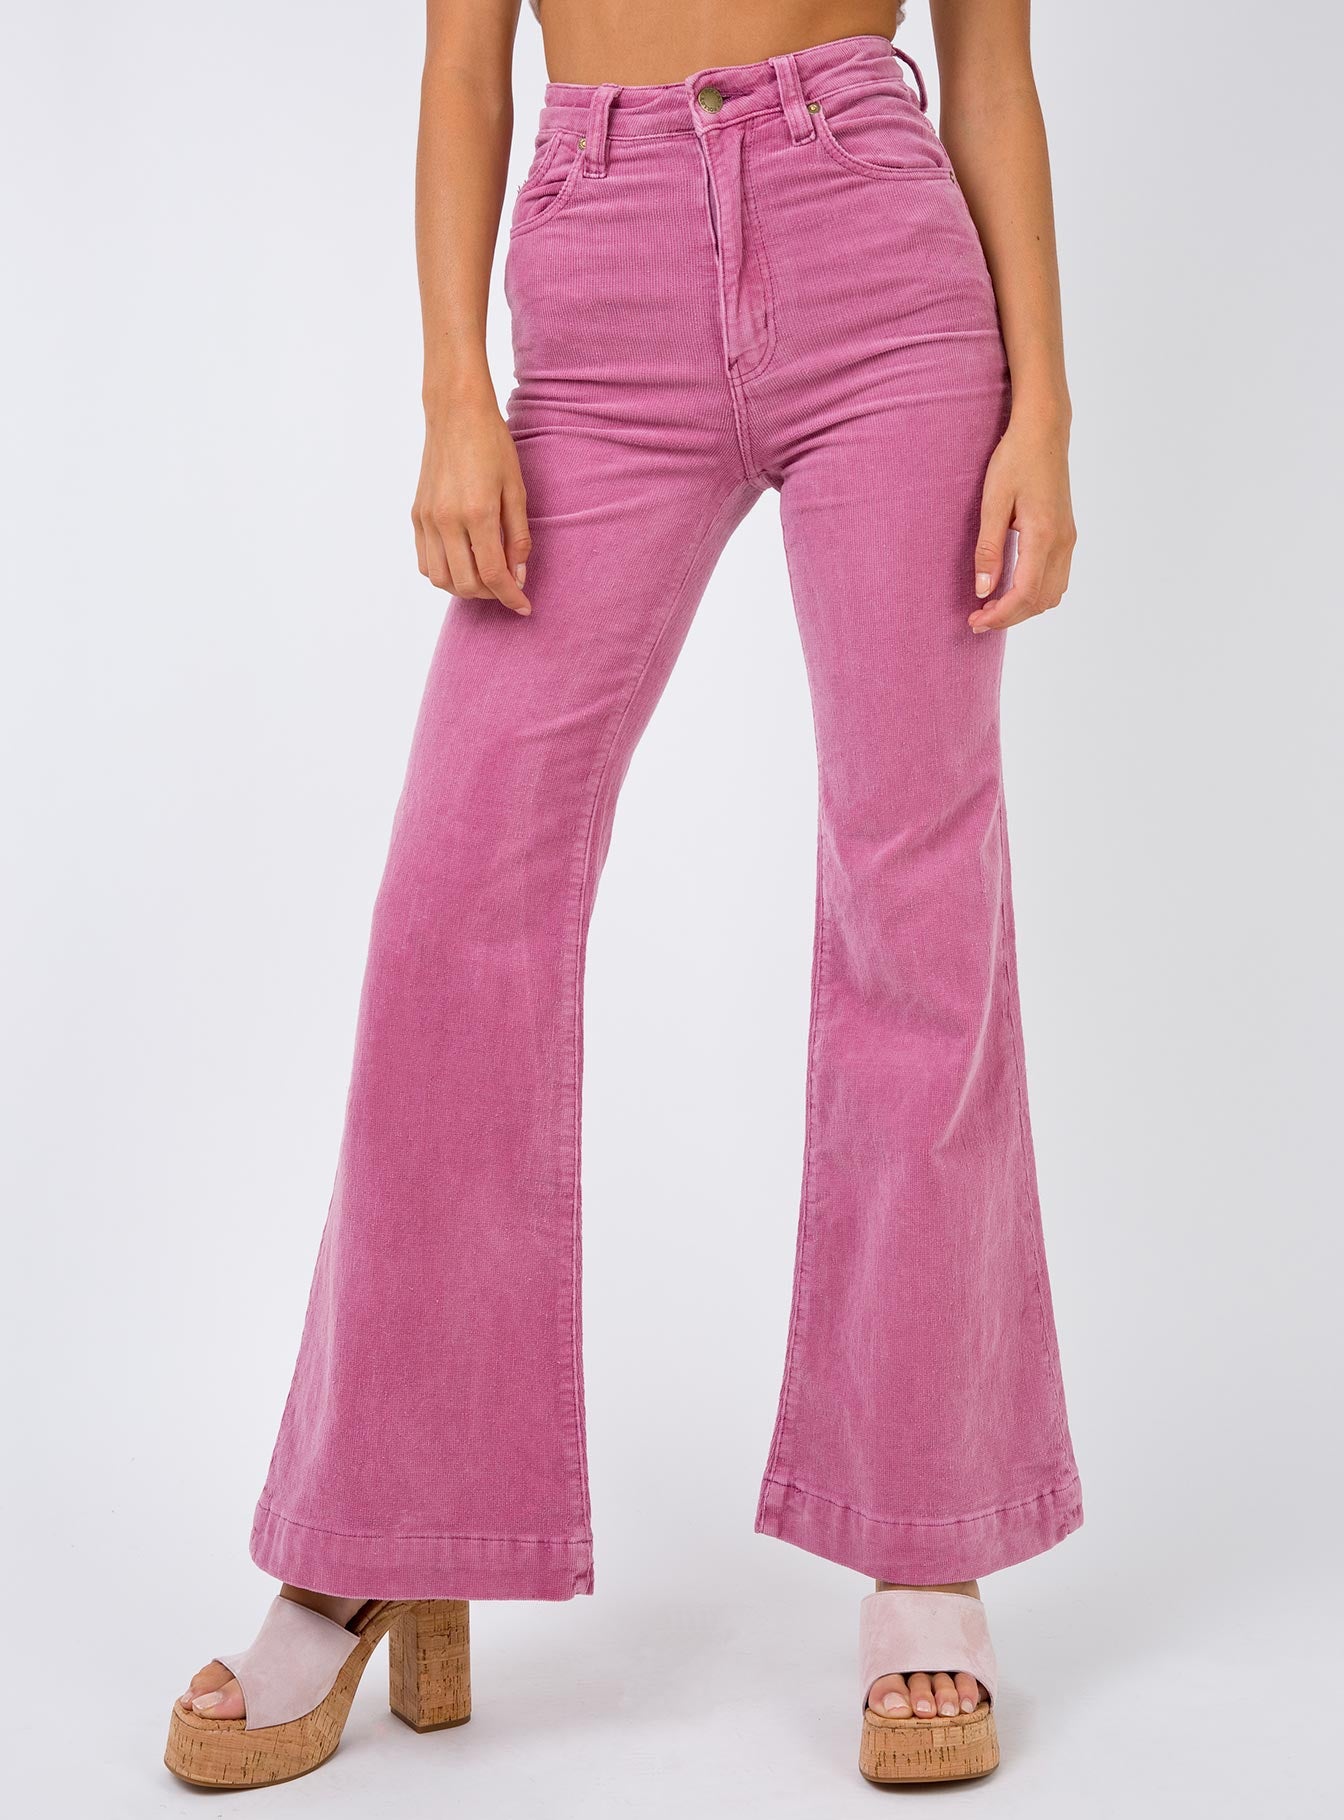 Rolla's Eastcoast Flares Lilac Cord